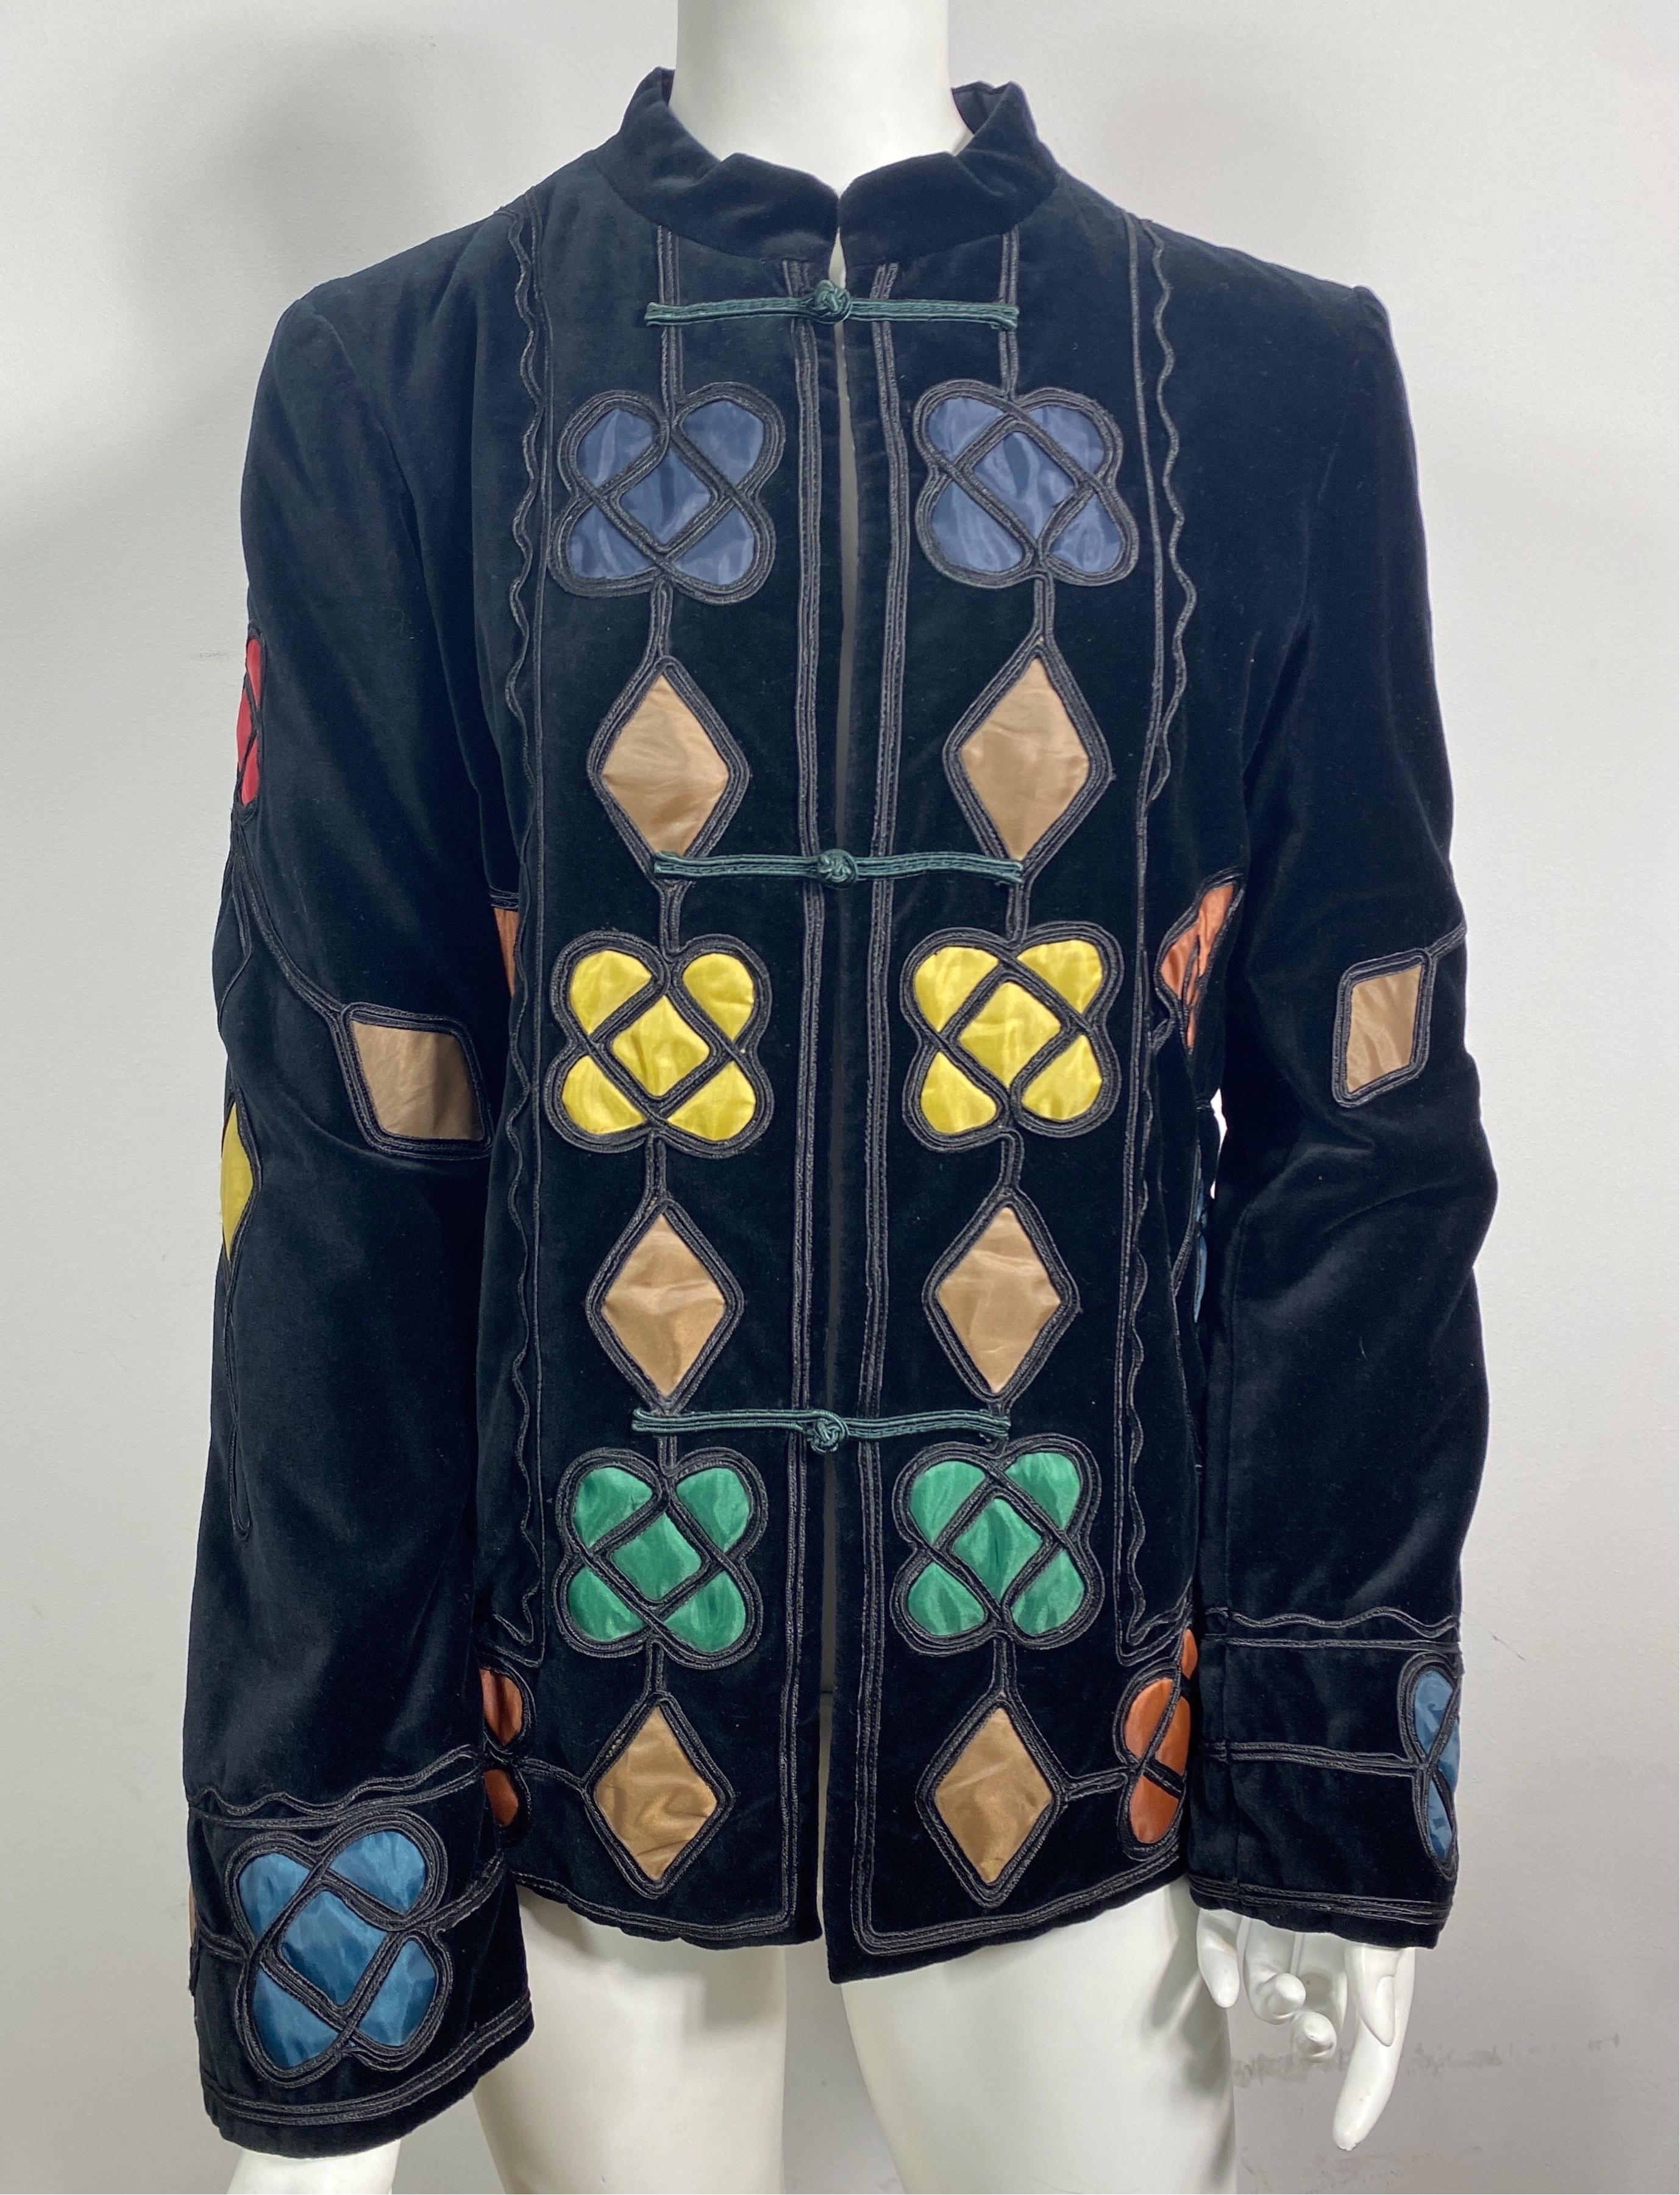 Giorgio Armani Black Velvet Jacket with Silk Geometric Inserts - Size 8  This beautiful evening velvet jacket has a 1.25” mandarin collar, is full lined, has multi colored silk geometric shaped inserts with black cording detail outlining the